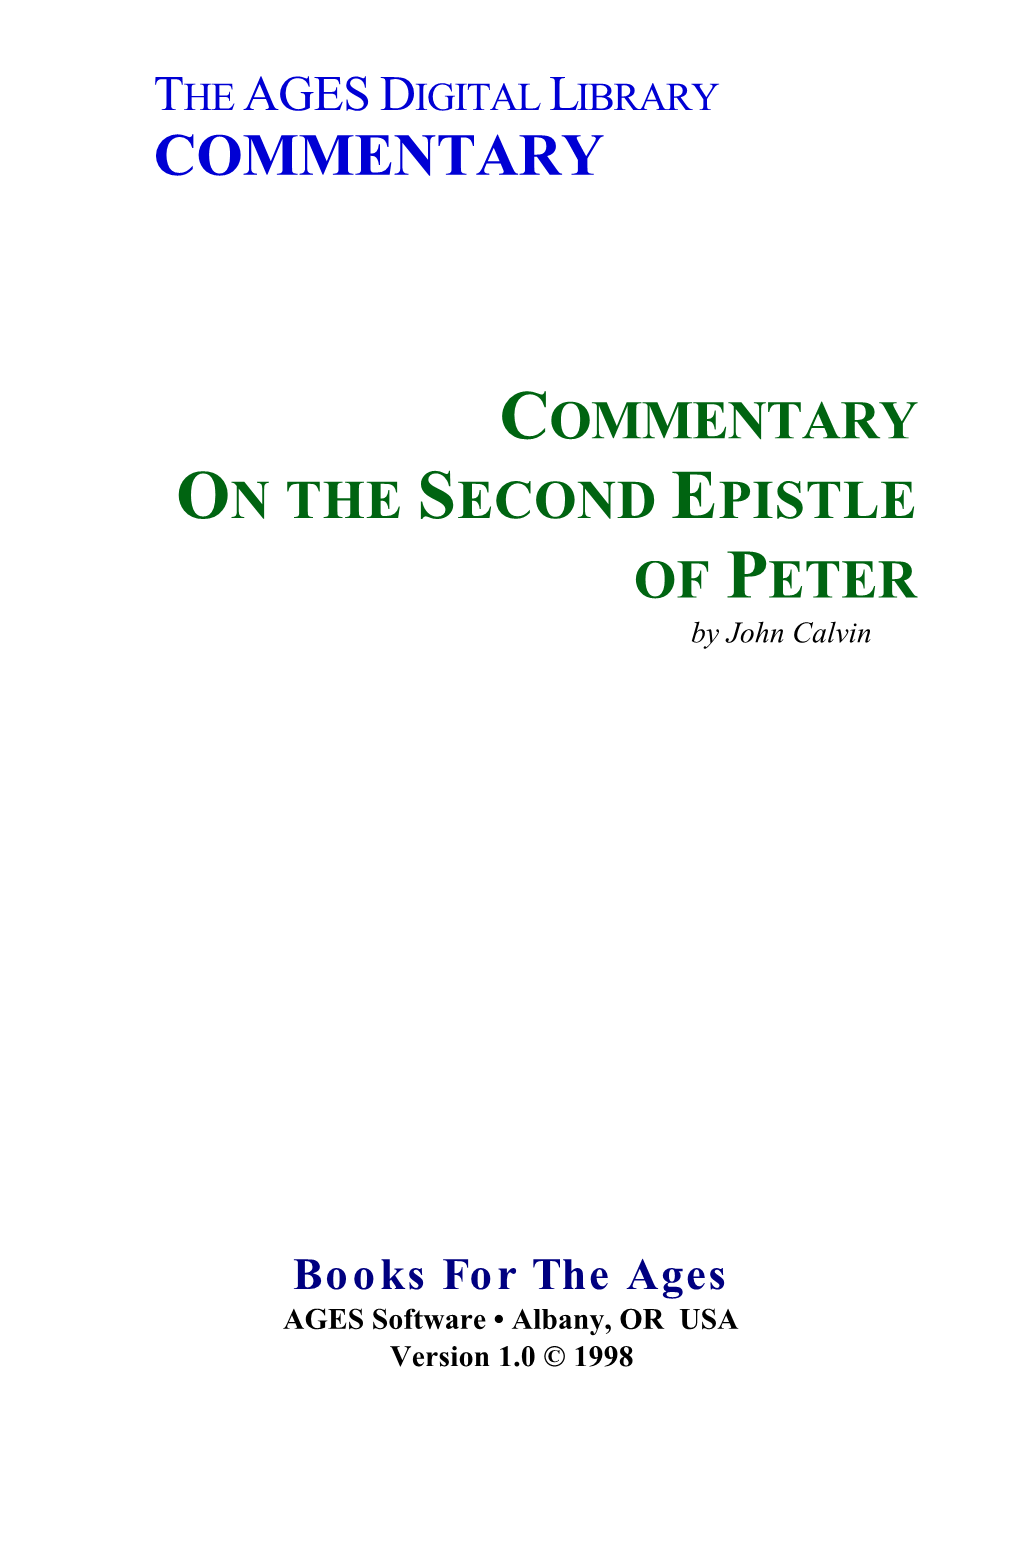 Commentarty on the Second Epistle of Peter